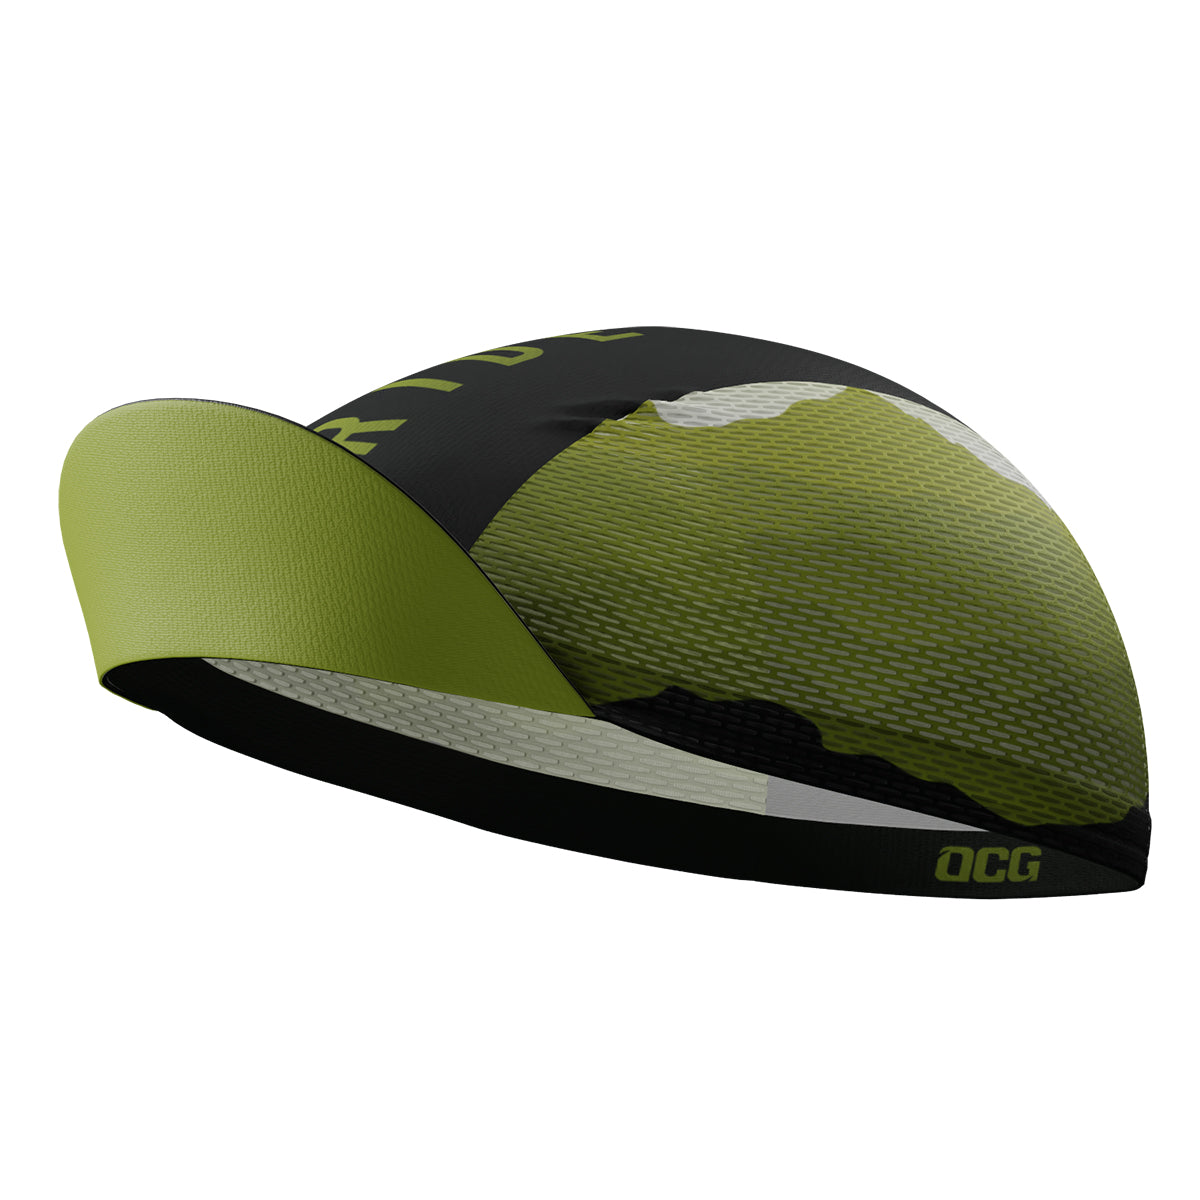 Unisex Ride Free Sunset Quick-Dry Cycling Cap